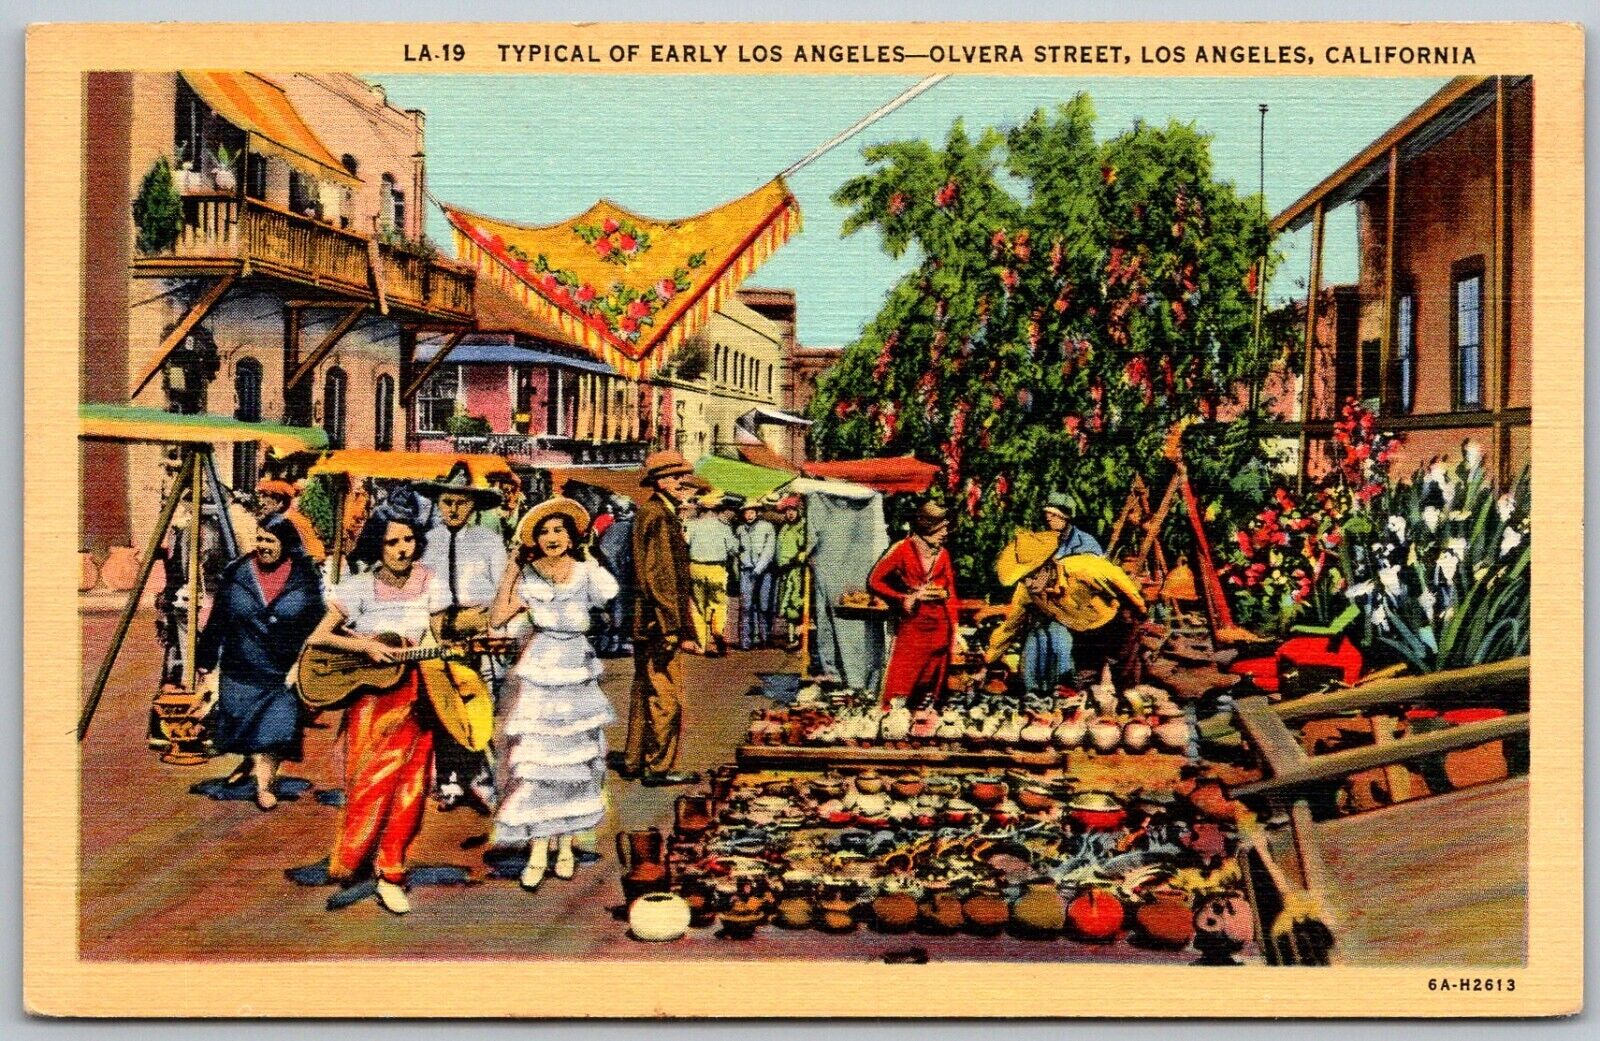 Los Angeles California 1940s Postcard Olivera Street Market Typical Of Early LA